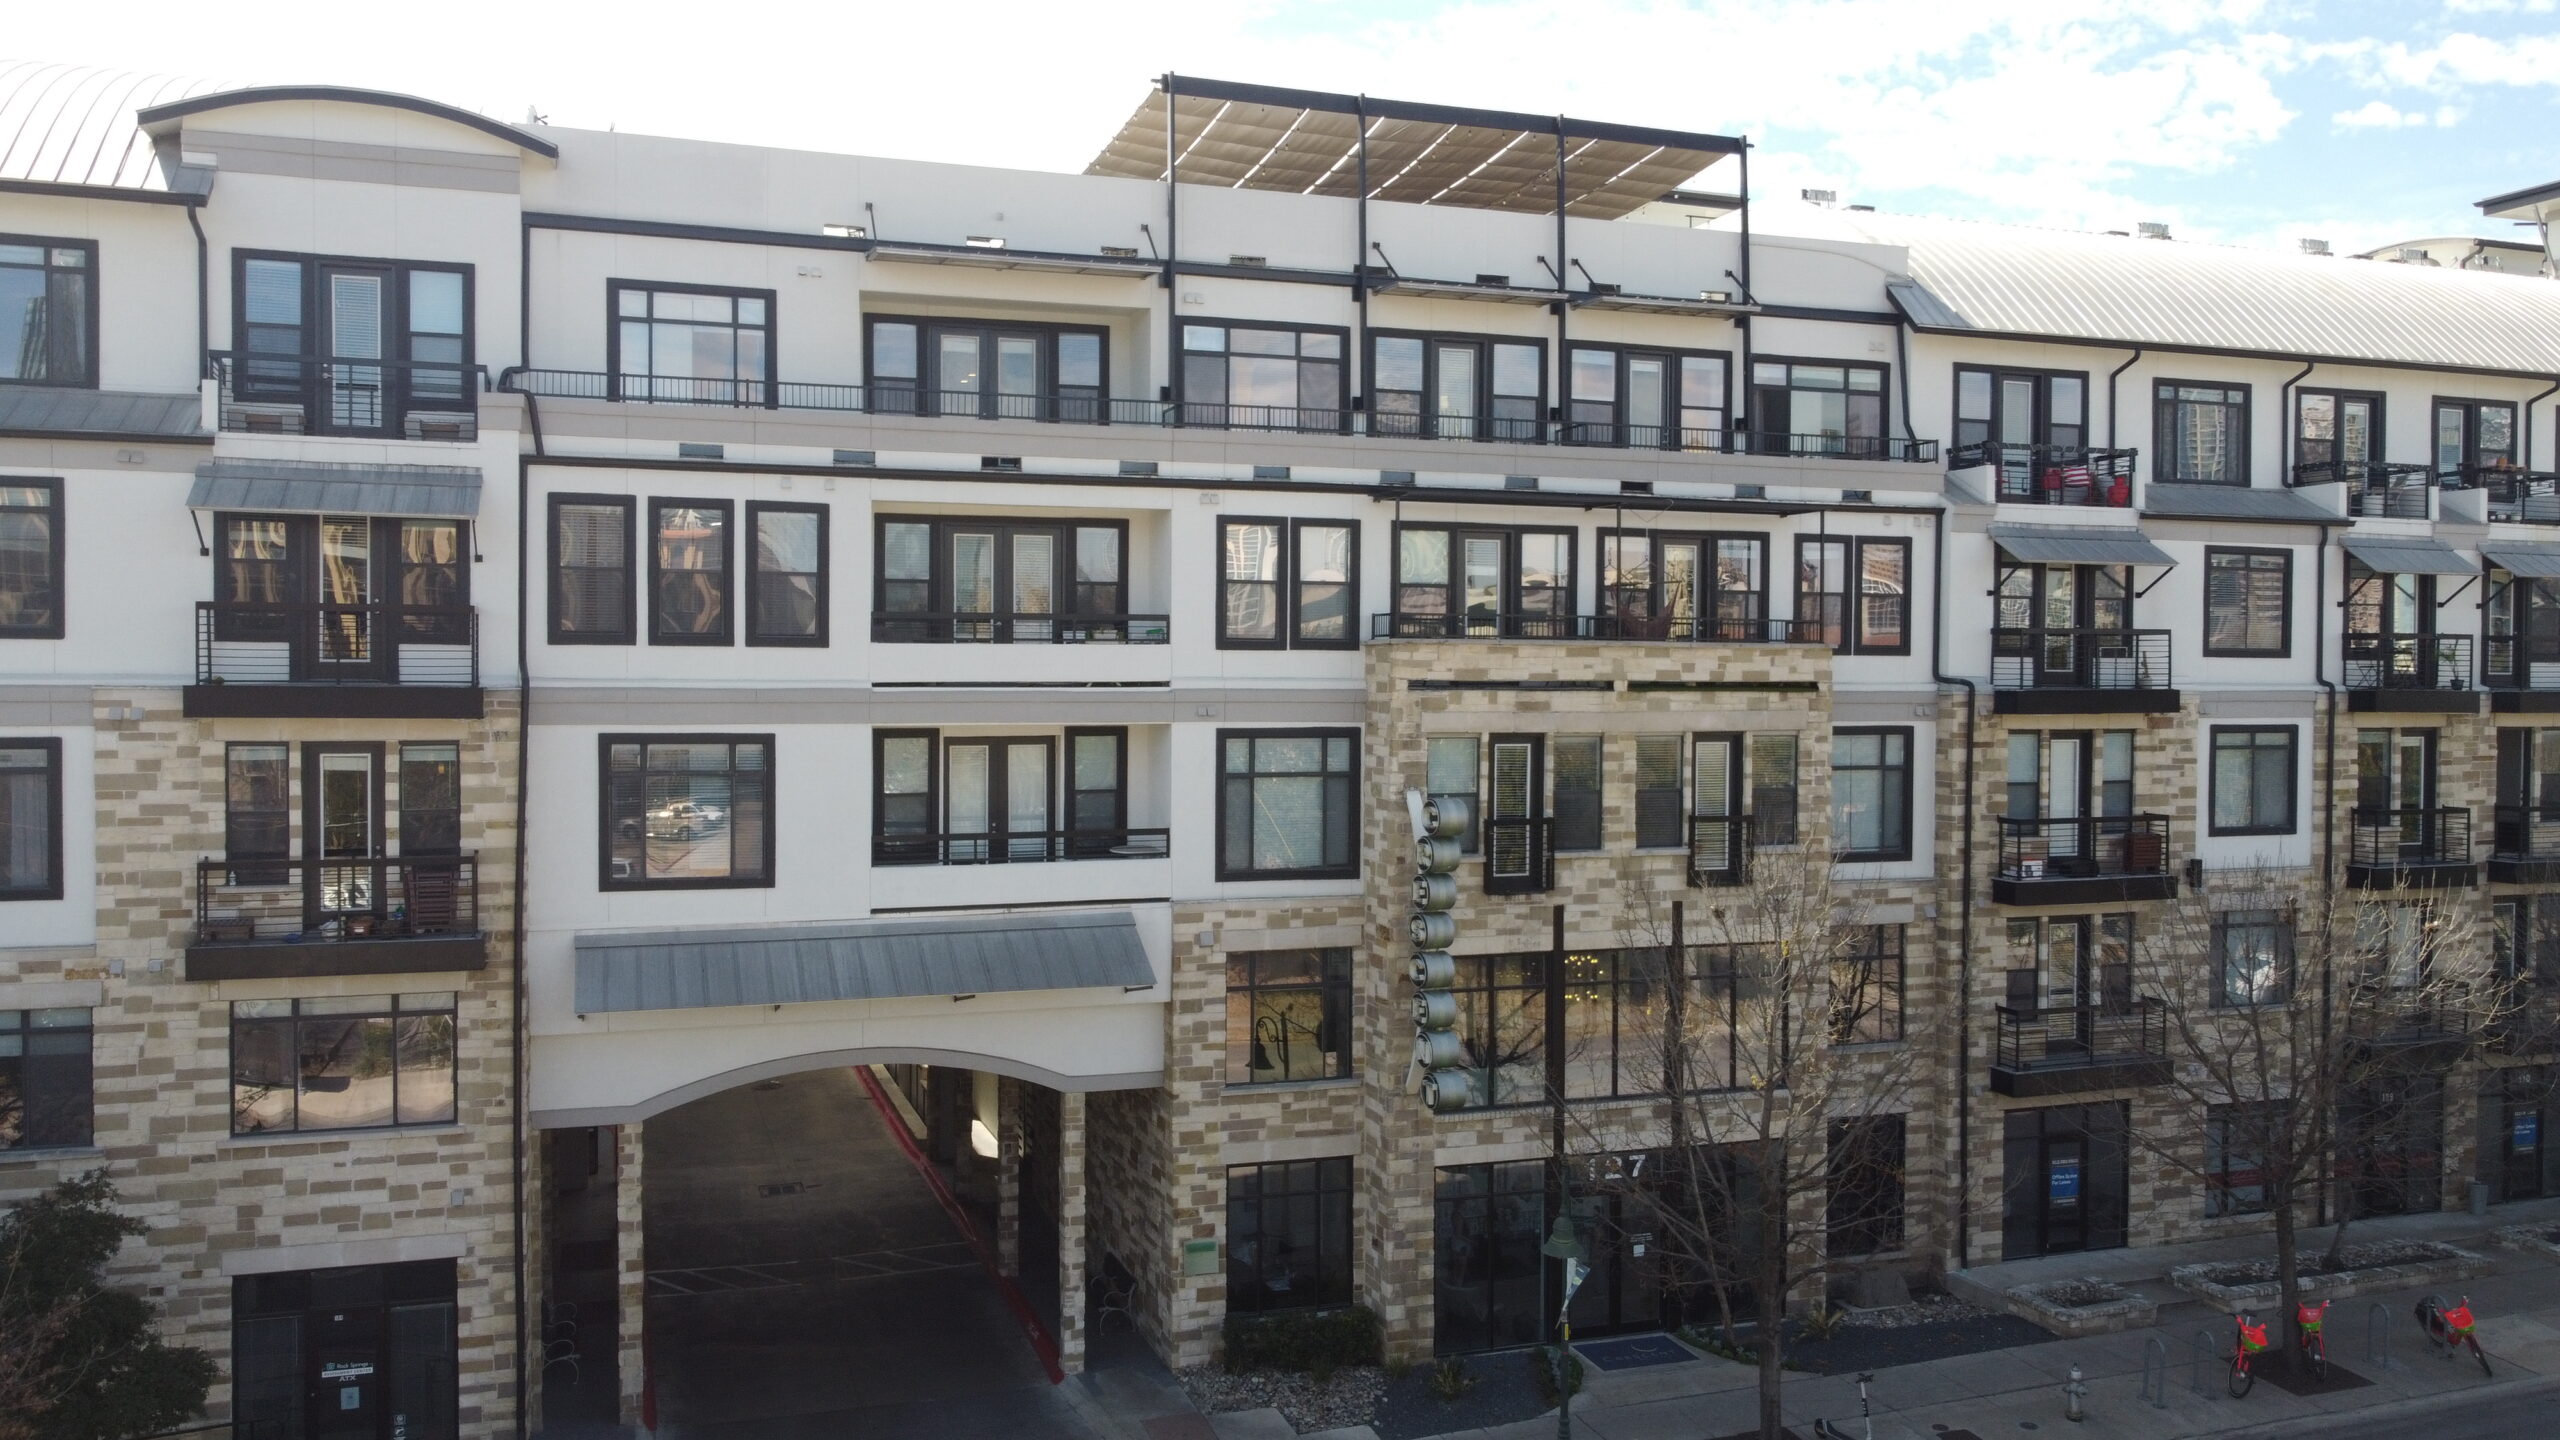 How to Complete Multifamily Construction Projects with Minimal Impact on Residents